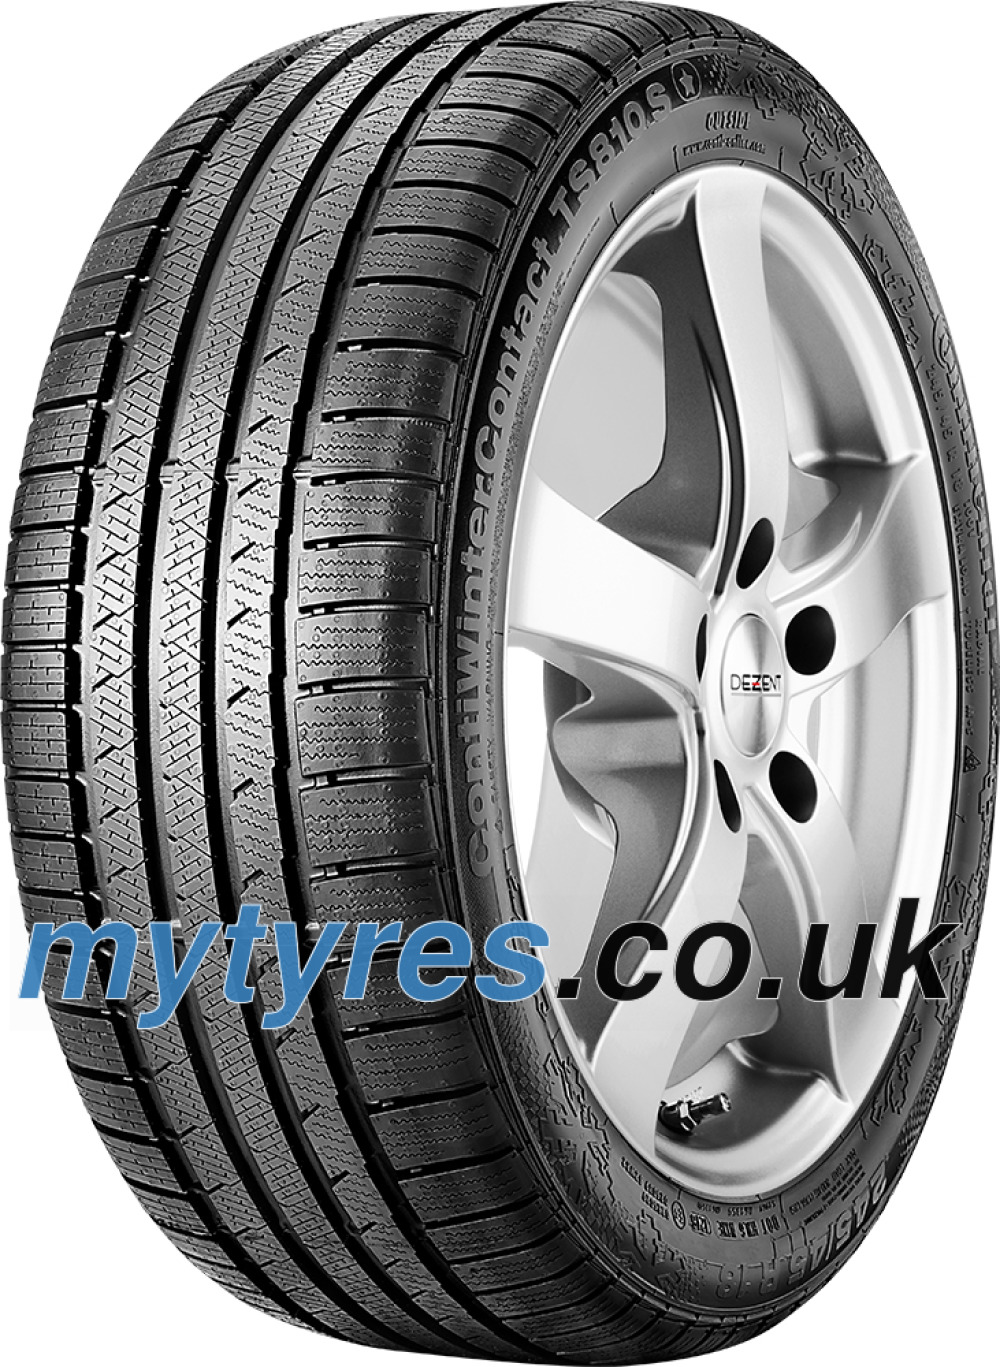 Continental ContiWinterContact TS S 810 R15 175/65 84T @ 